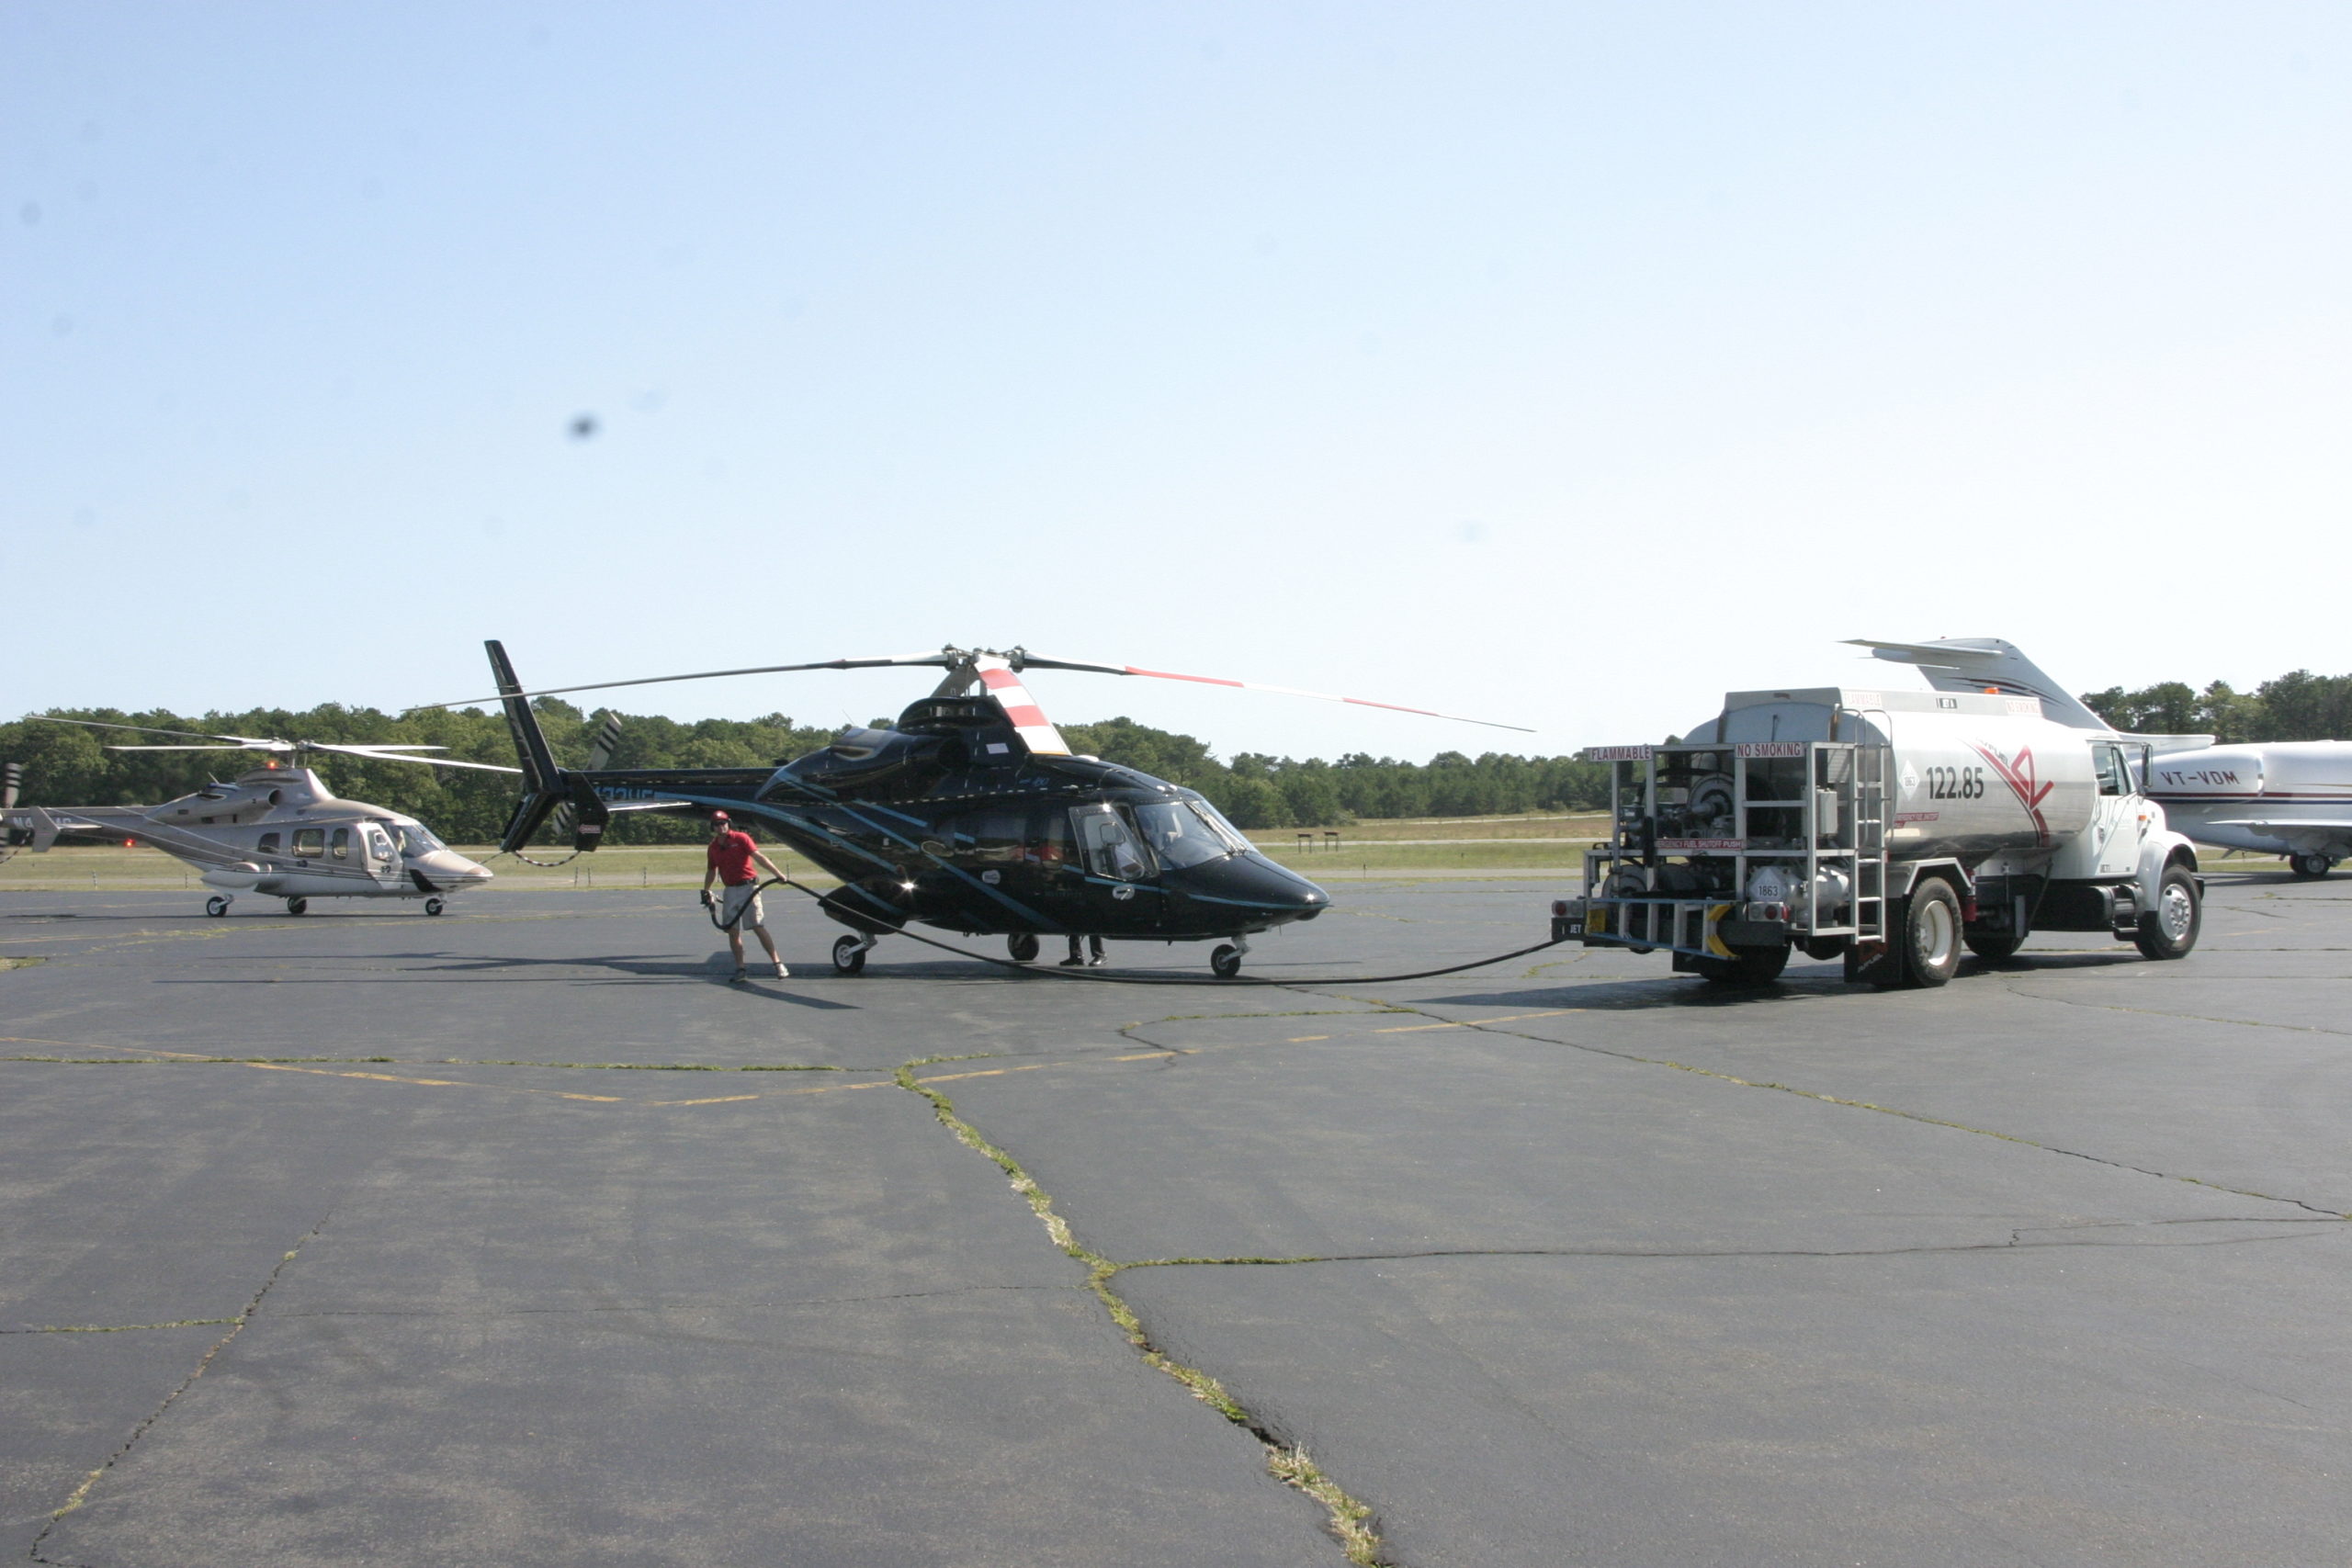 Commuter helicopters refueling at East Hampton Airport during a busy summer season.